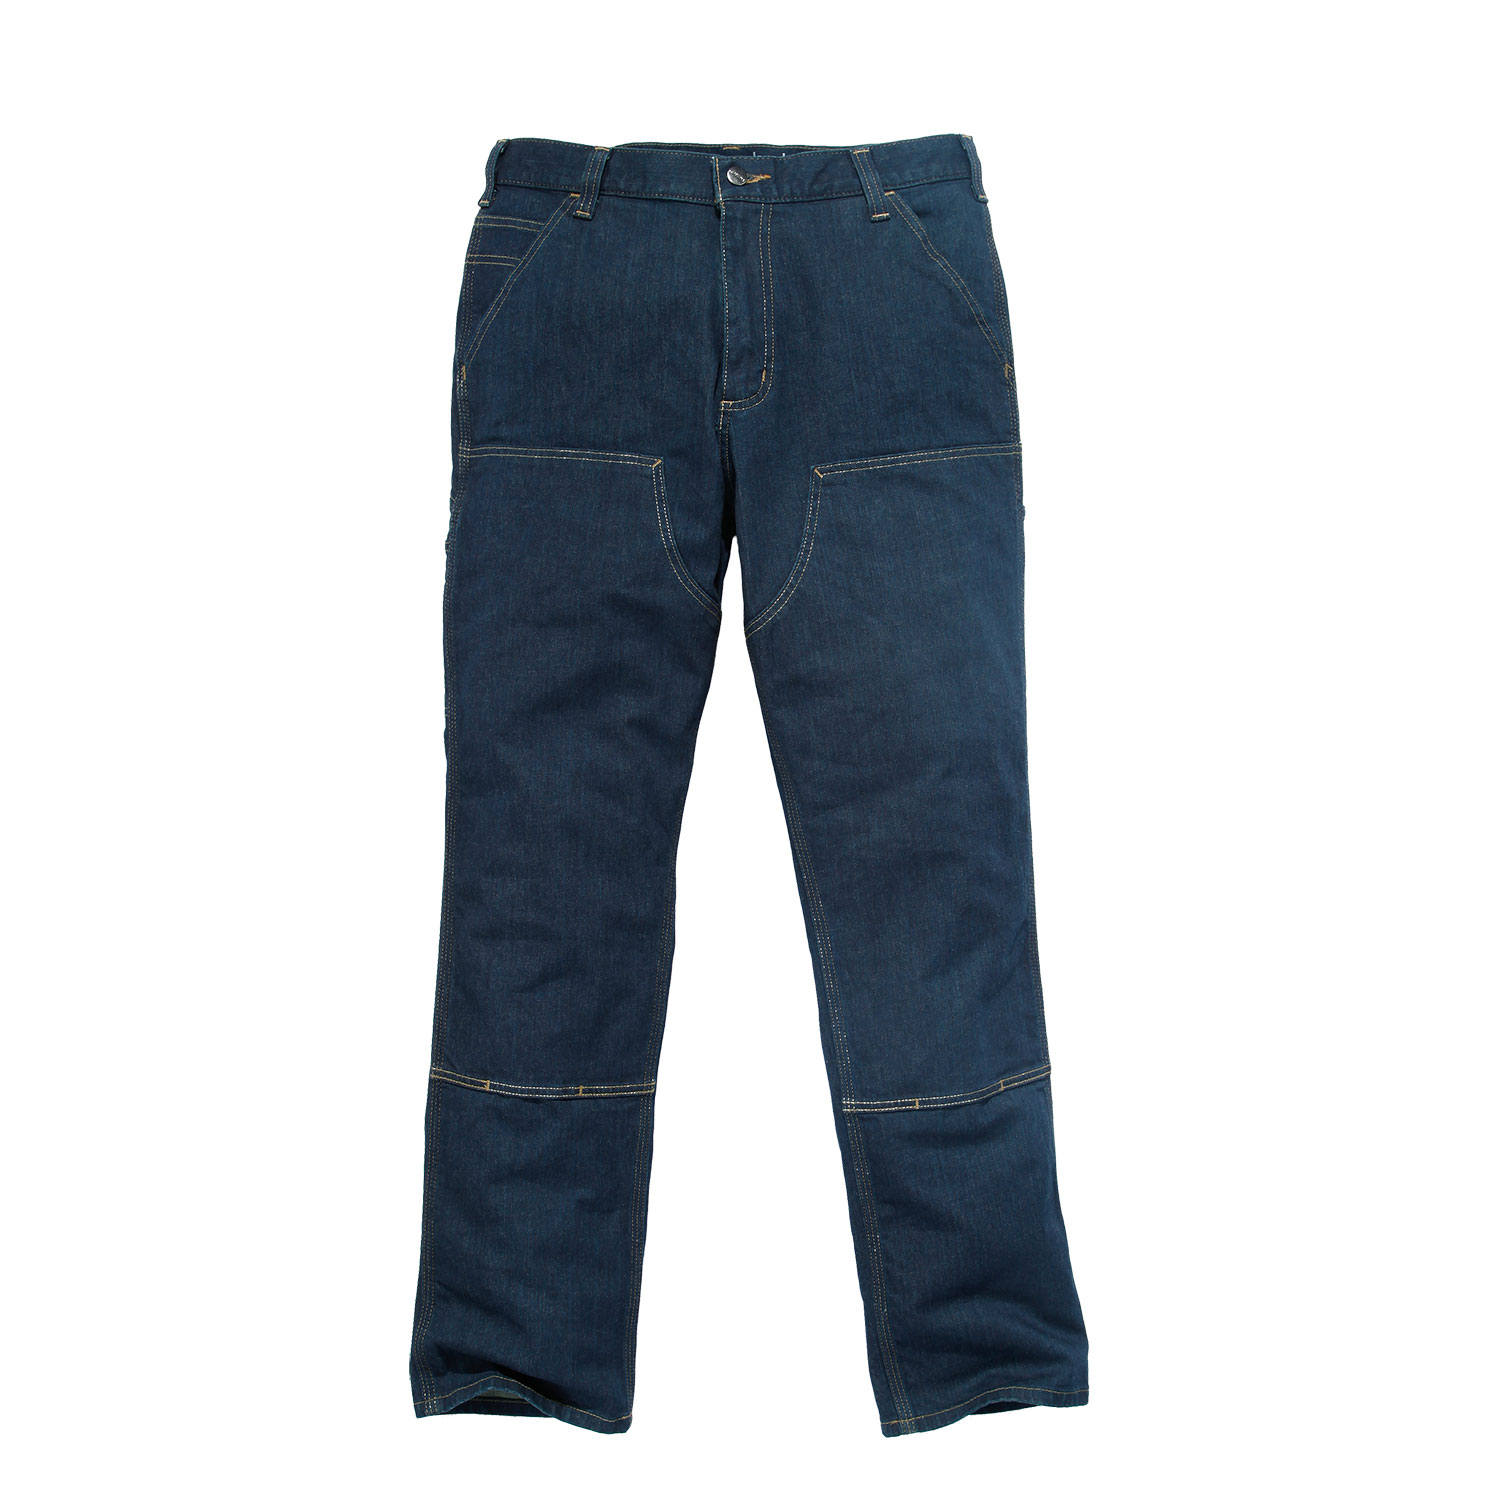 Carhartt Double Front Dungaree Jeans